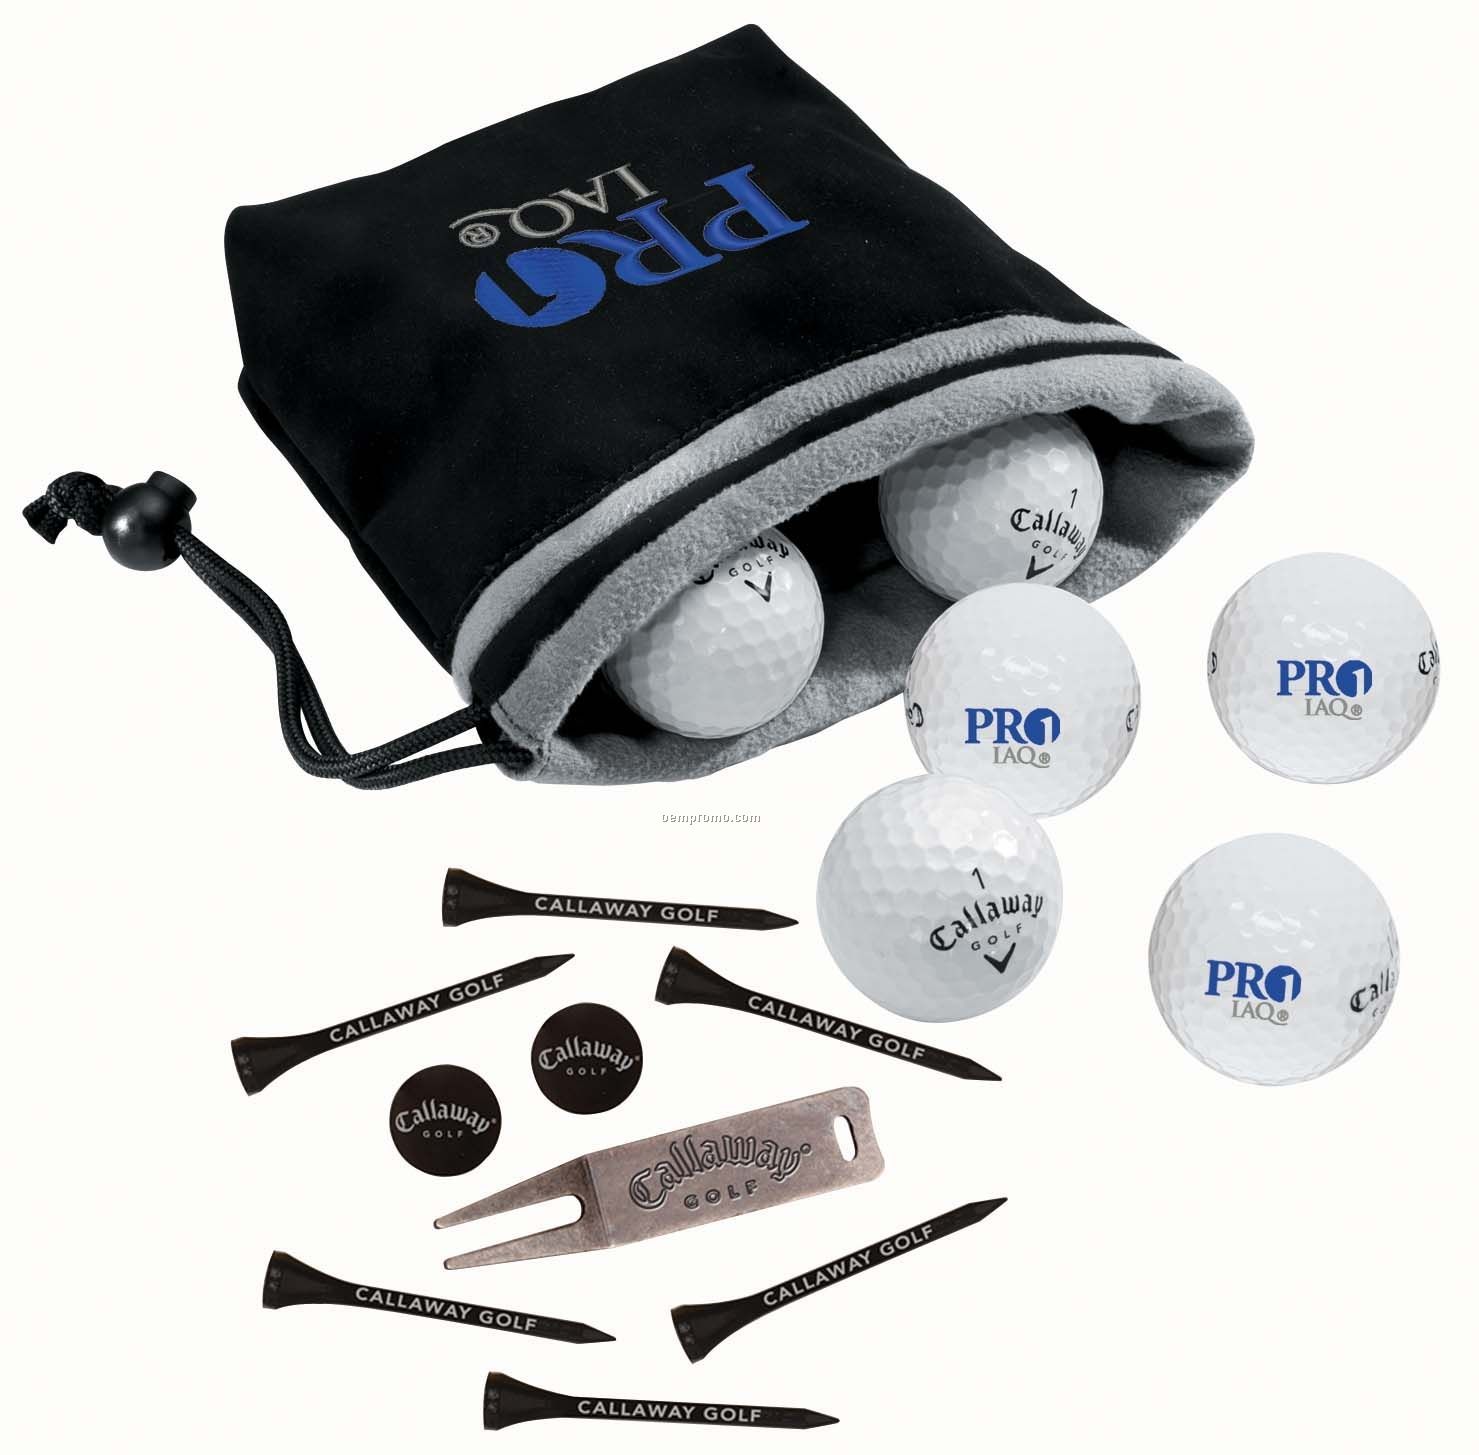 Callaway Tour I(S) 6 Golf Ball Valuables Pouch W/ 6 Long Tees & Divot Tool